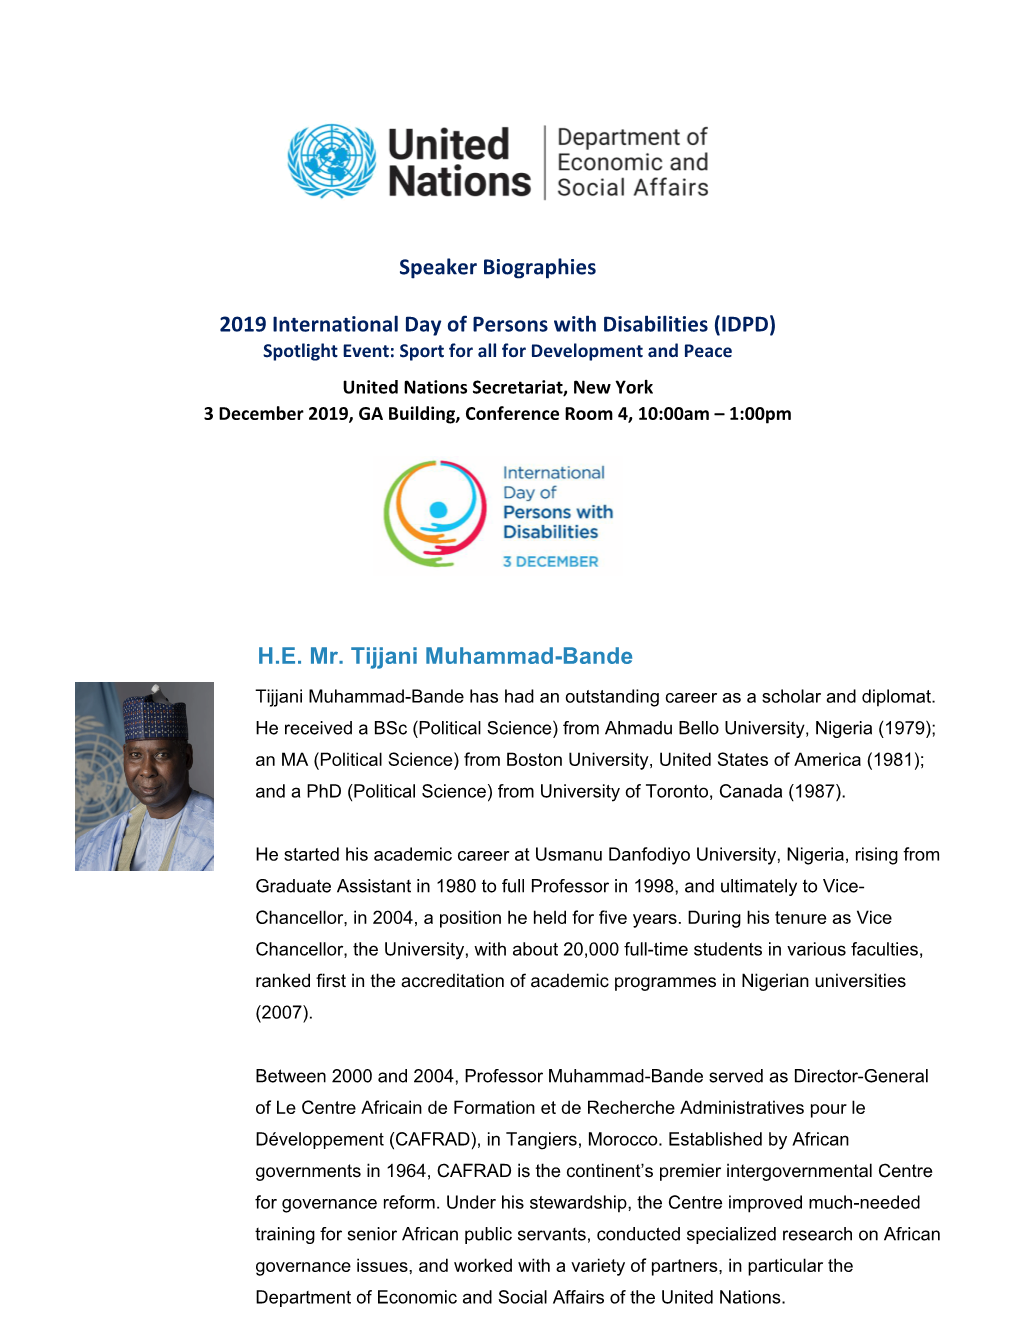 Speaker Biographies 2019 International Day of Persons with Disabilities (IDPD) H.E. Mr. Tijjani Muhammad-Bande